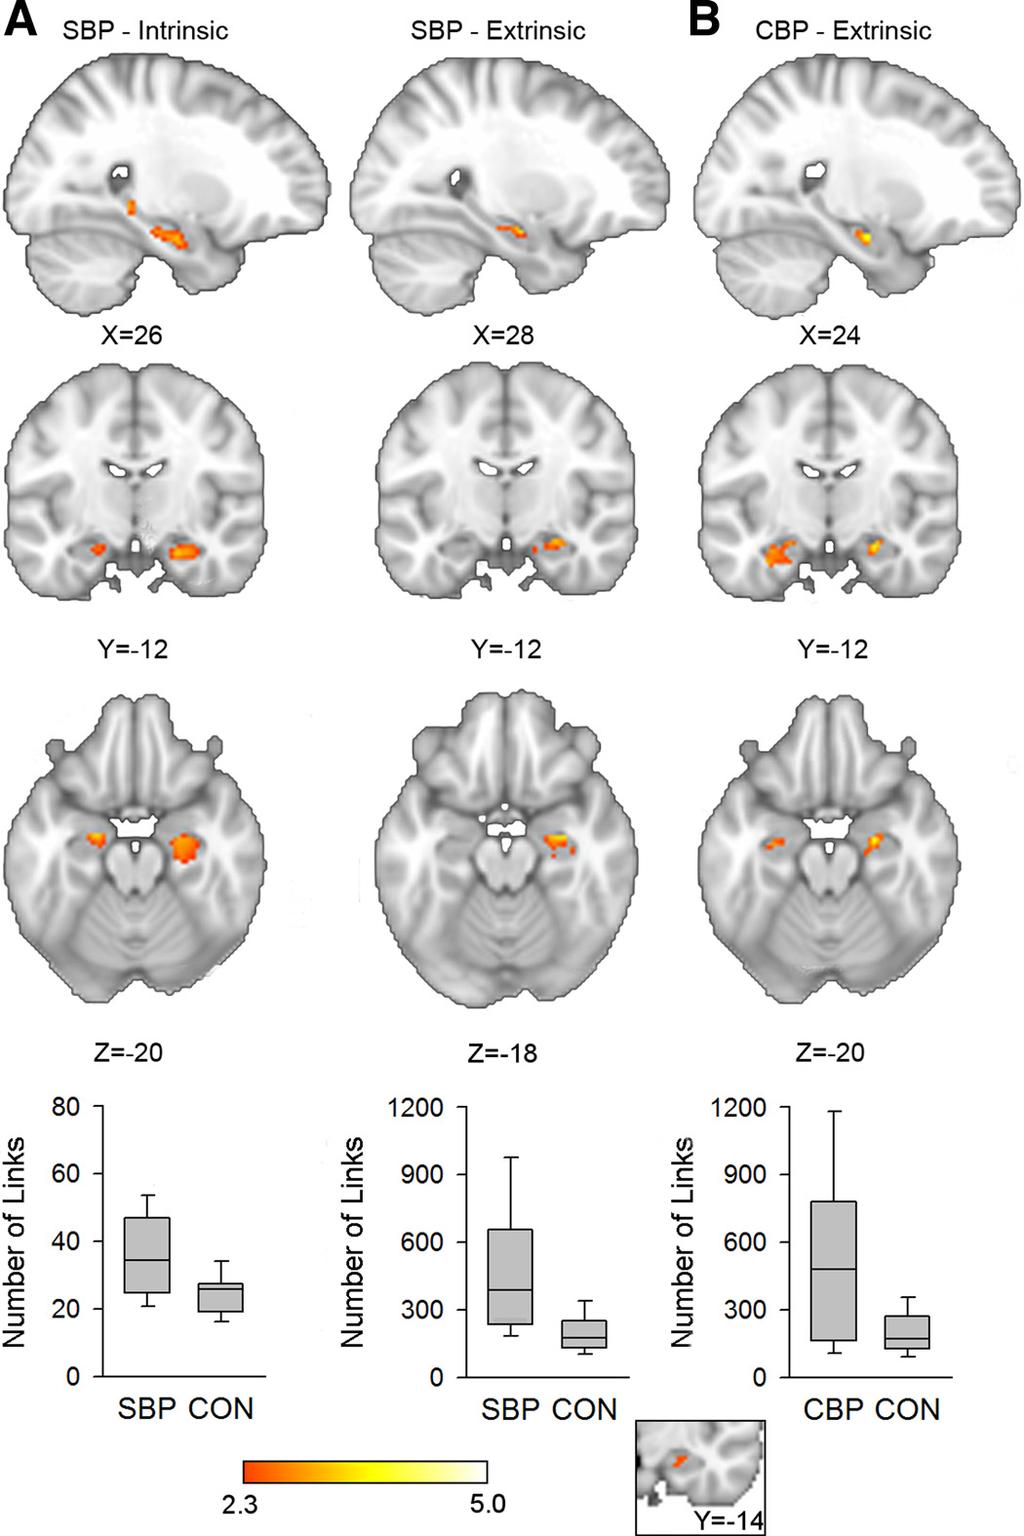 1070 HIPPOCAMPAL FUNCTIONAL CONNECTIVITY AND PAIN Table 2. Locations with greatest connectivity increase relative to control subjects at visit 1 (illustrated in Fig.